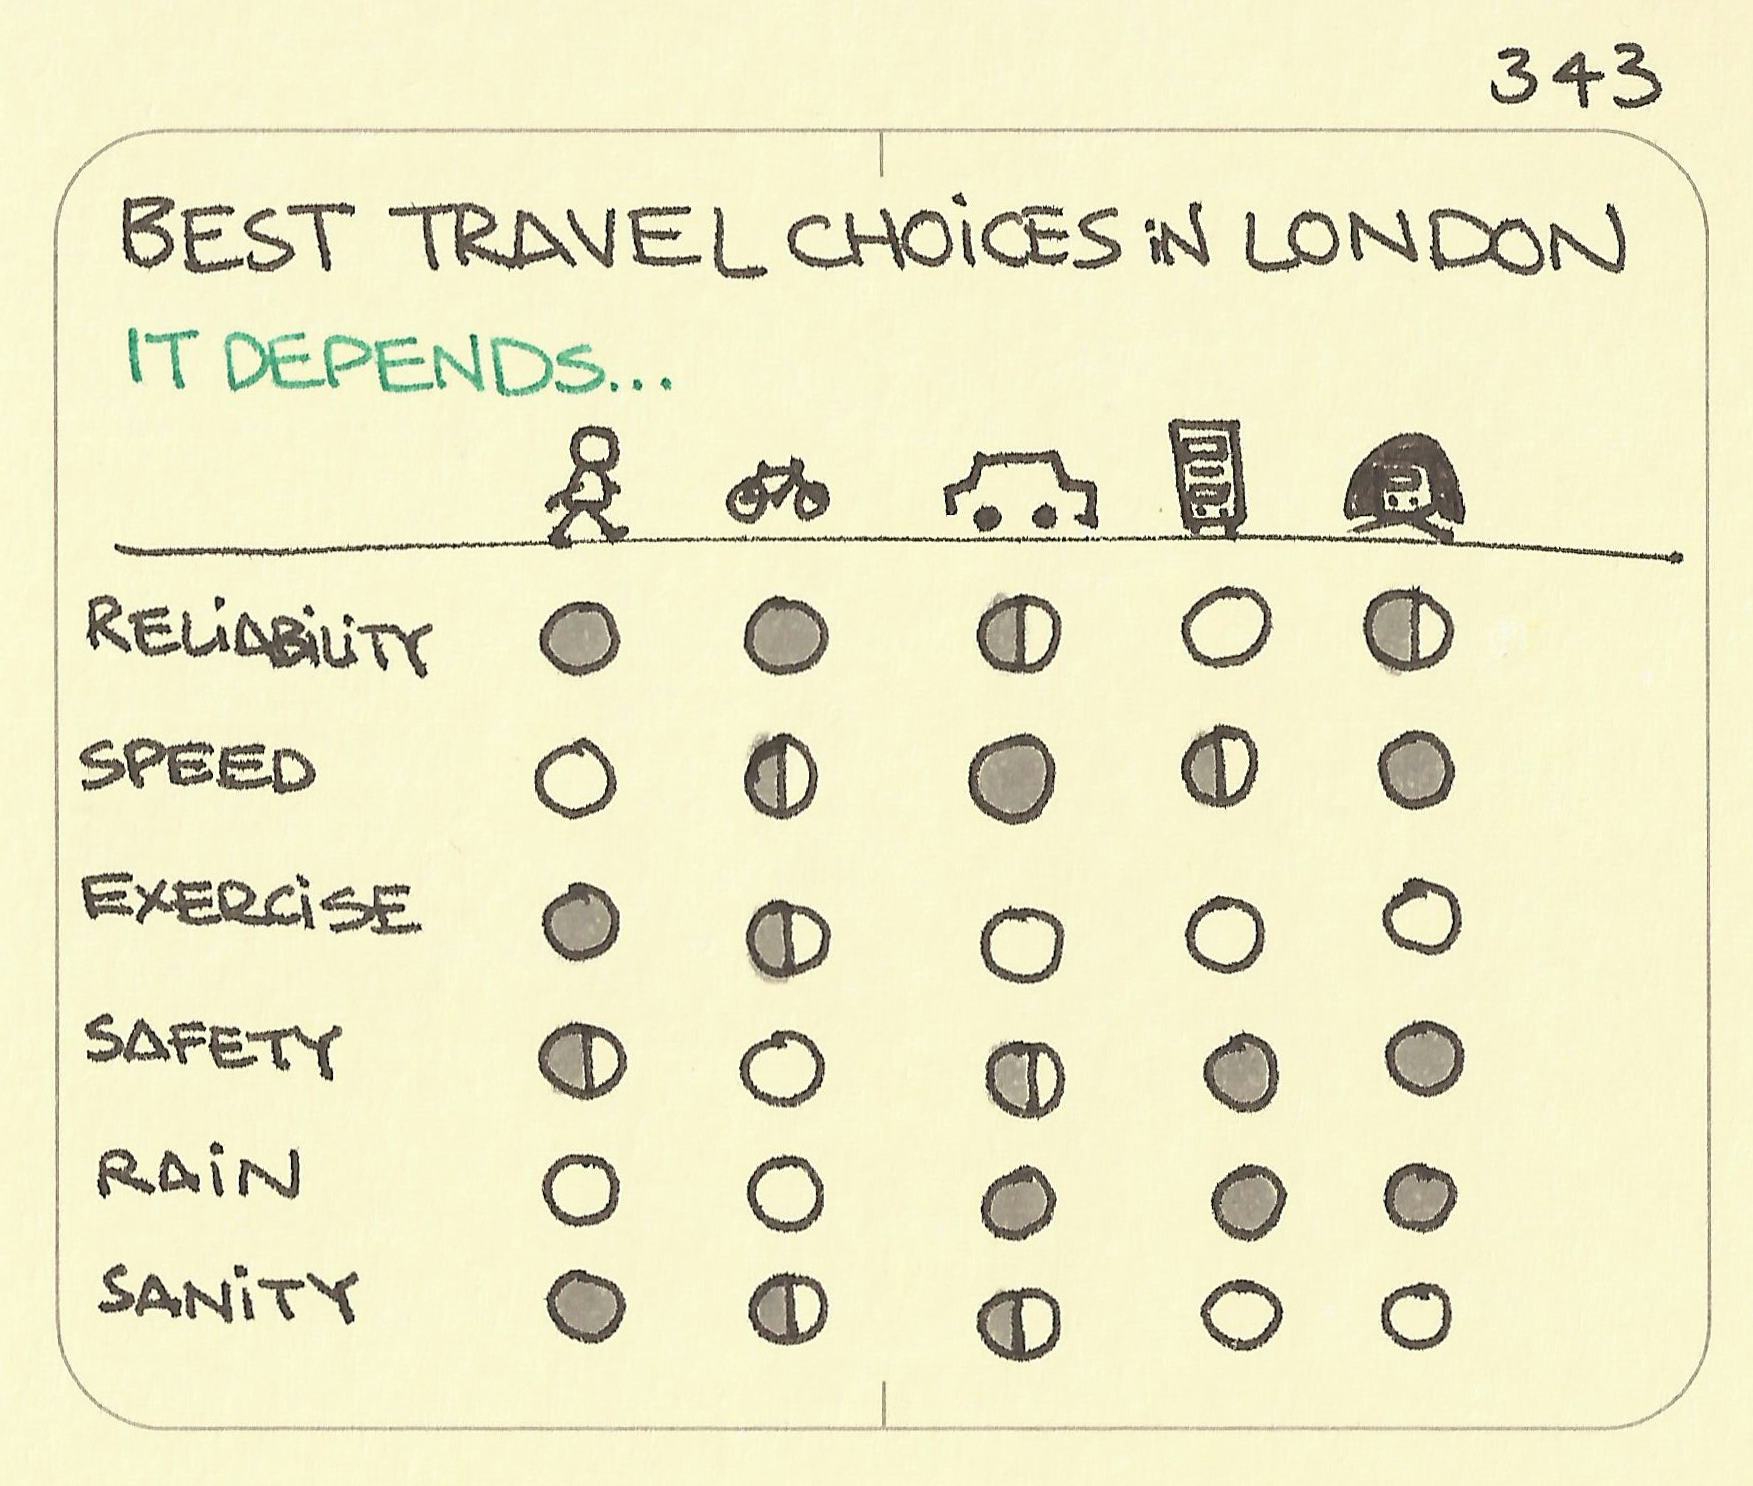 Best travel choices in London - Sketchplanations